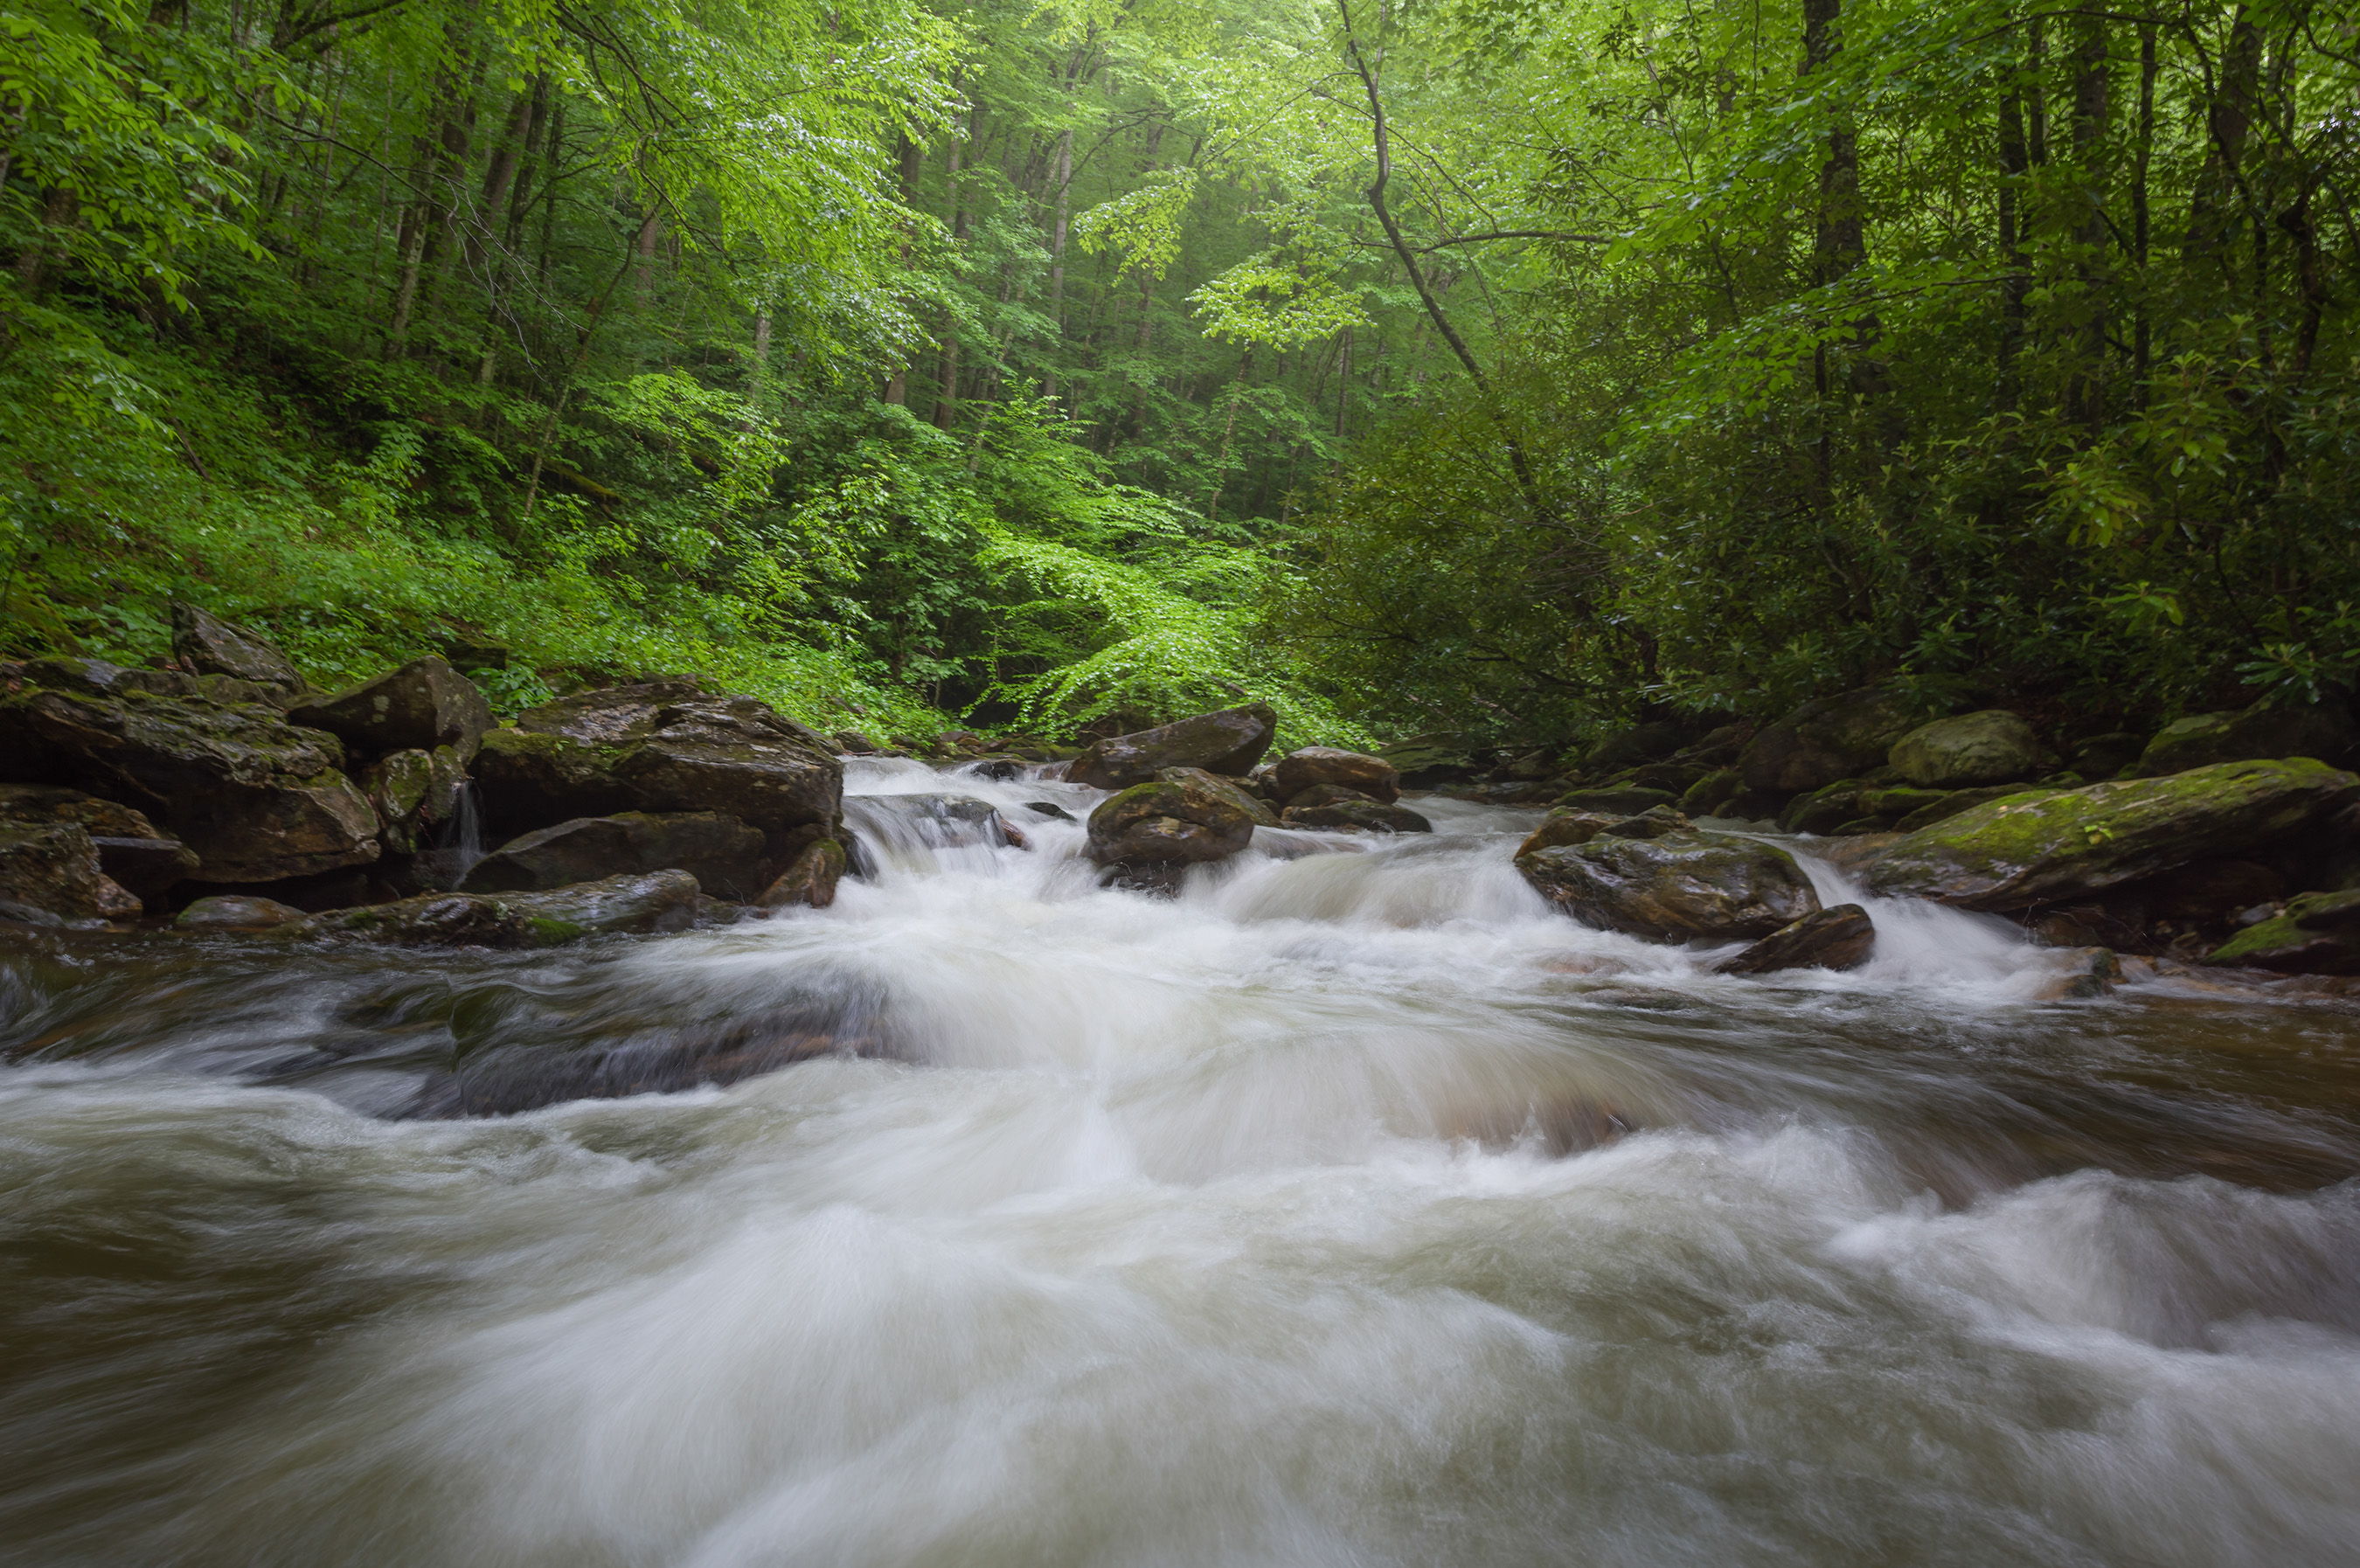 The Pisgah National Forest located in the Southern Appalachian Mountains is one of many wilderness areas that have benefited from the partnership between The Wilderness Society and The Dreaming Tree Wines. Photo Credit: Mason Cummings, The Wilderness Society.